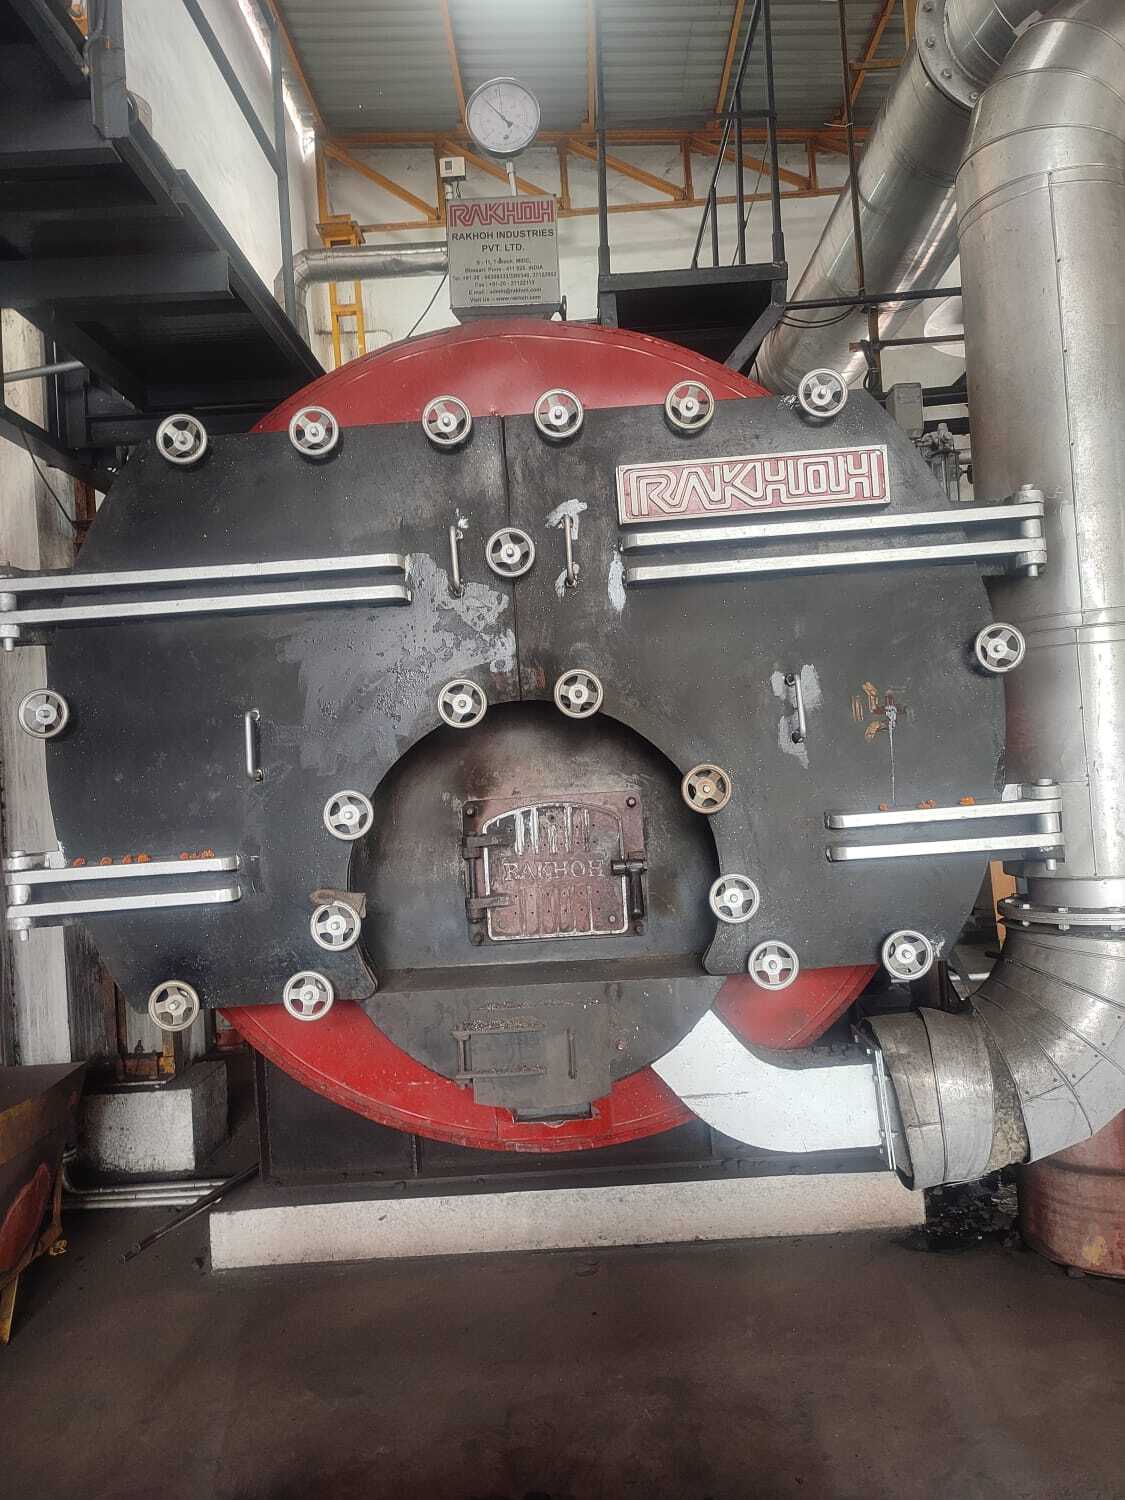 wood Coal Briquettes Fired Steam boiler Ranges From 1TPH to 8 TPH